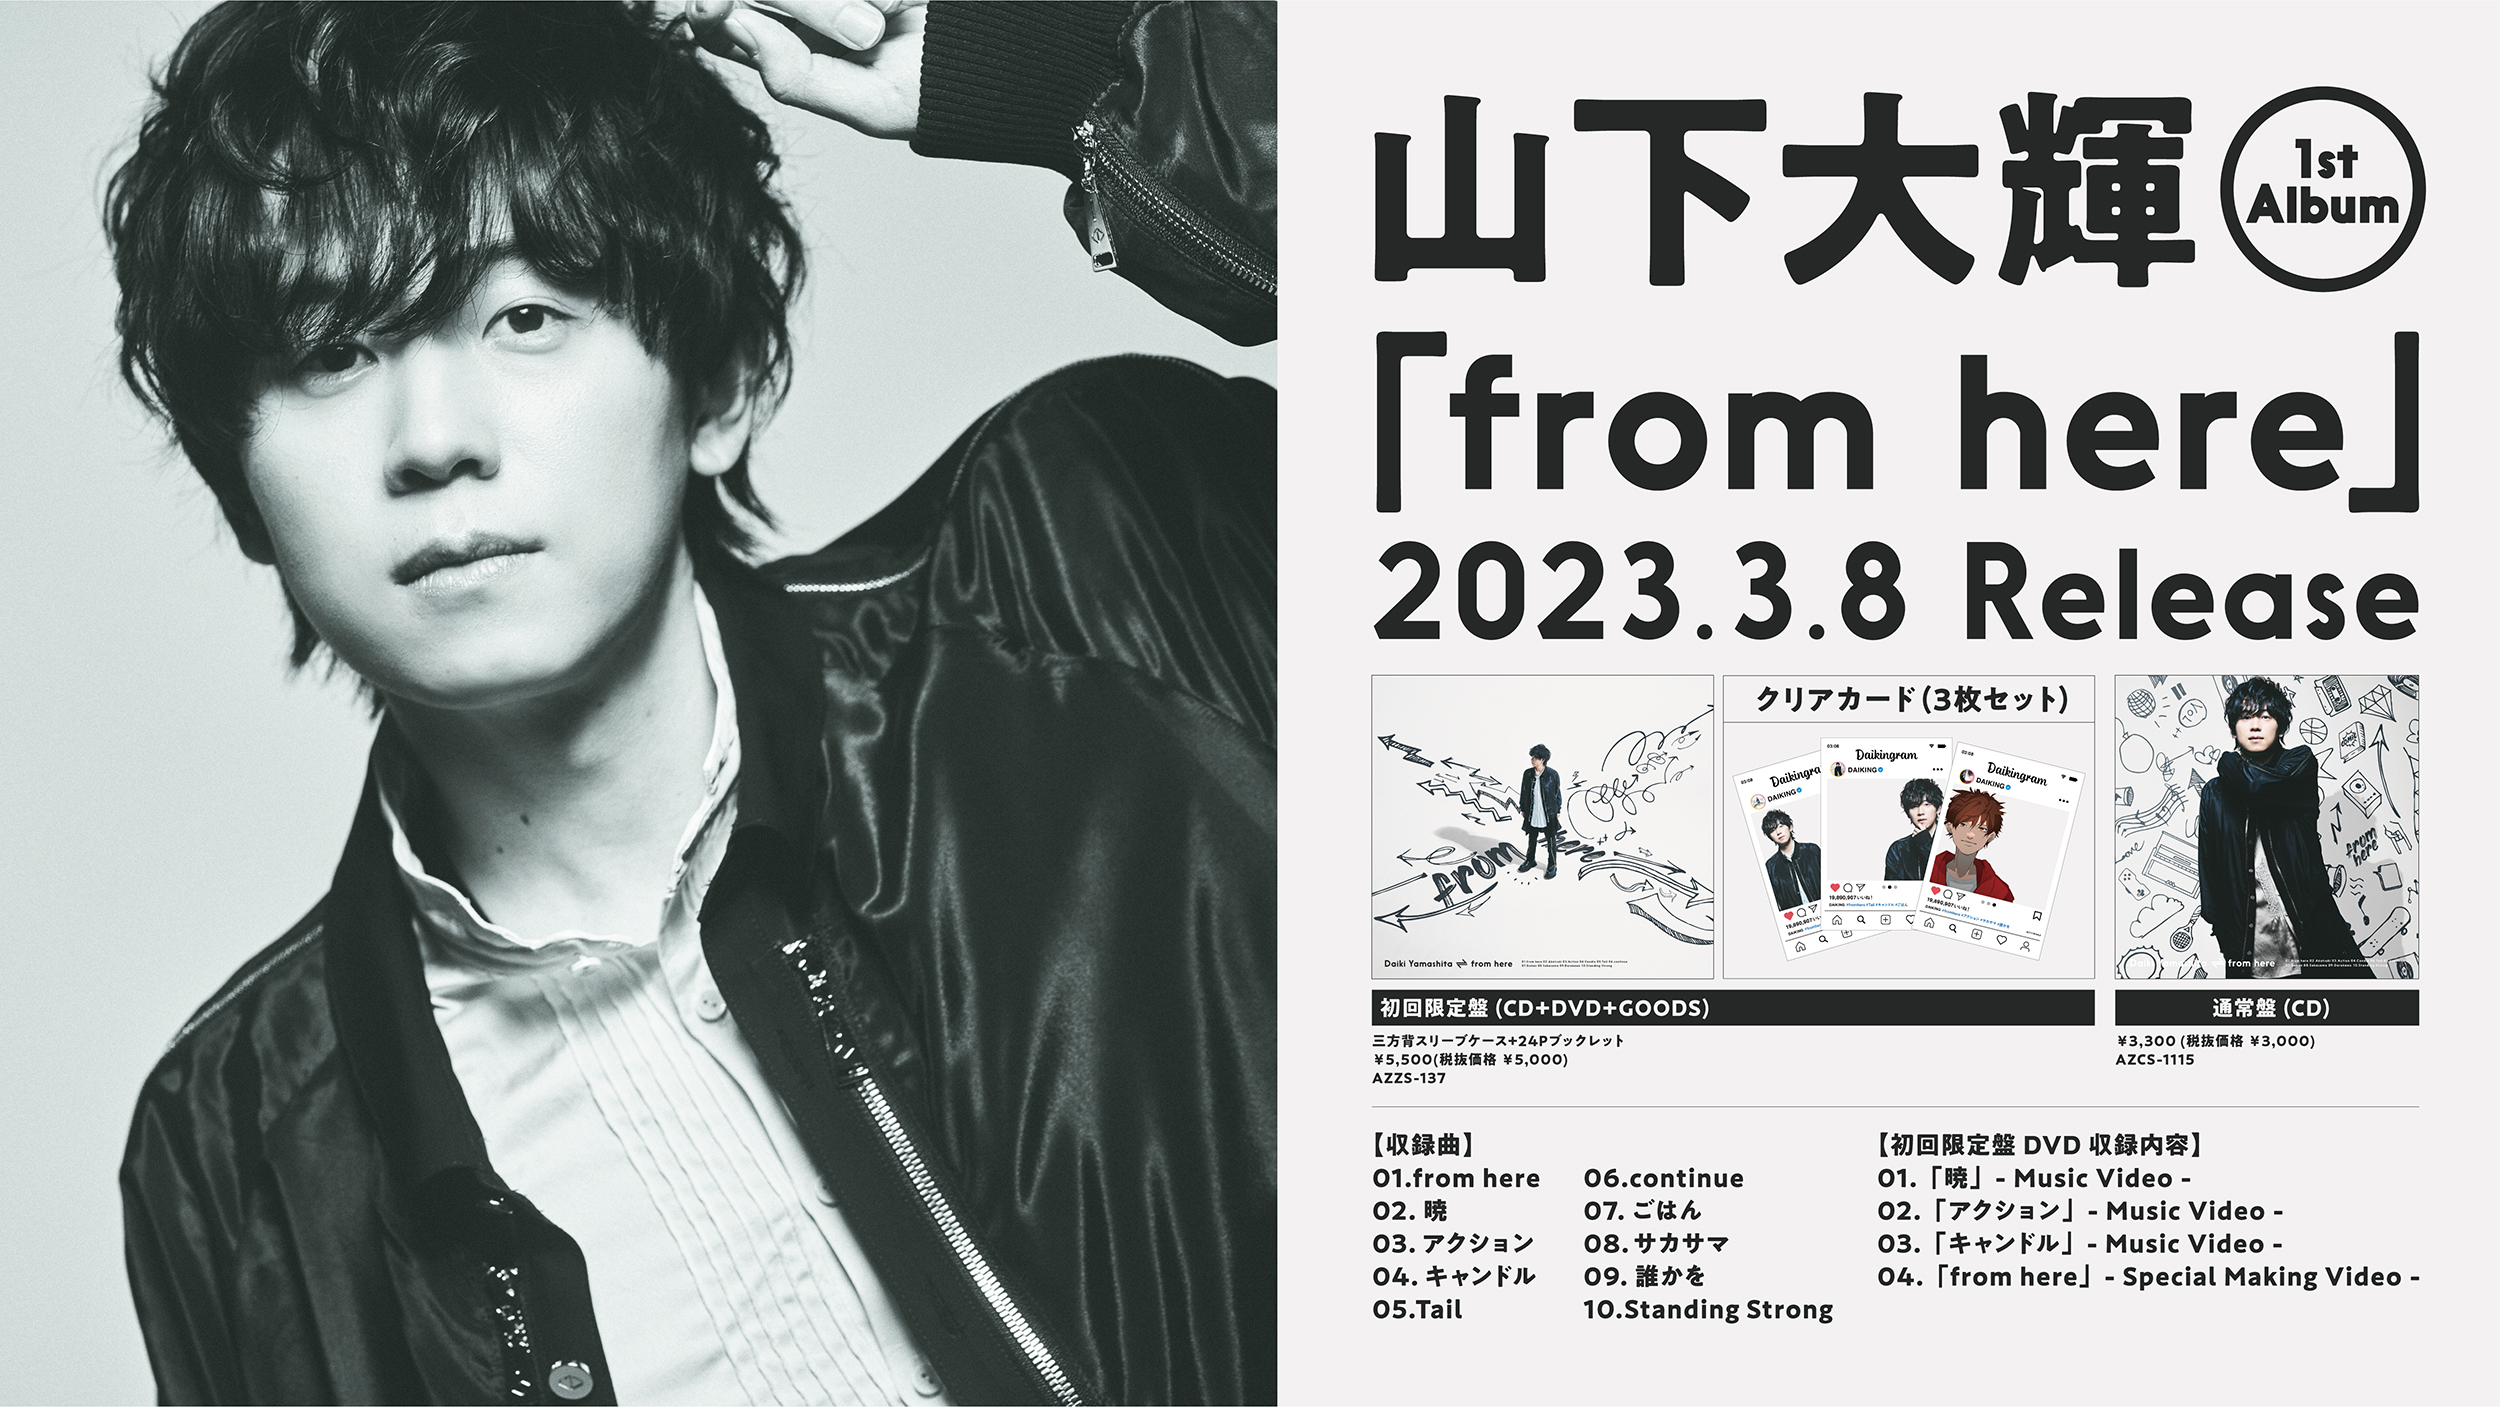 1st Album「from here」2023.3.8 Release